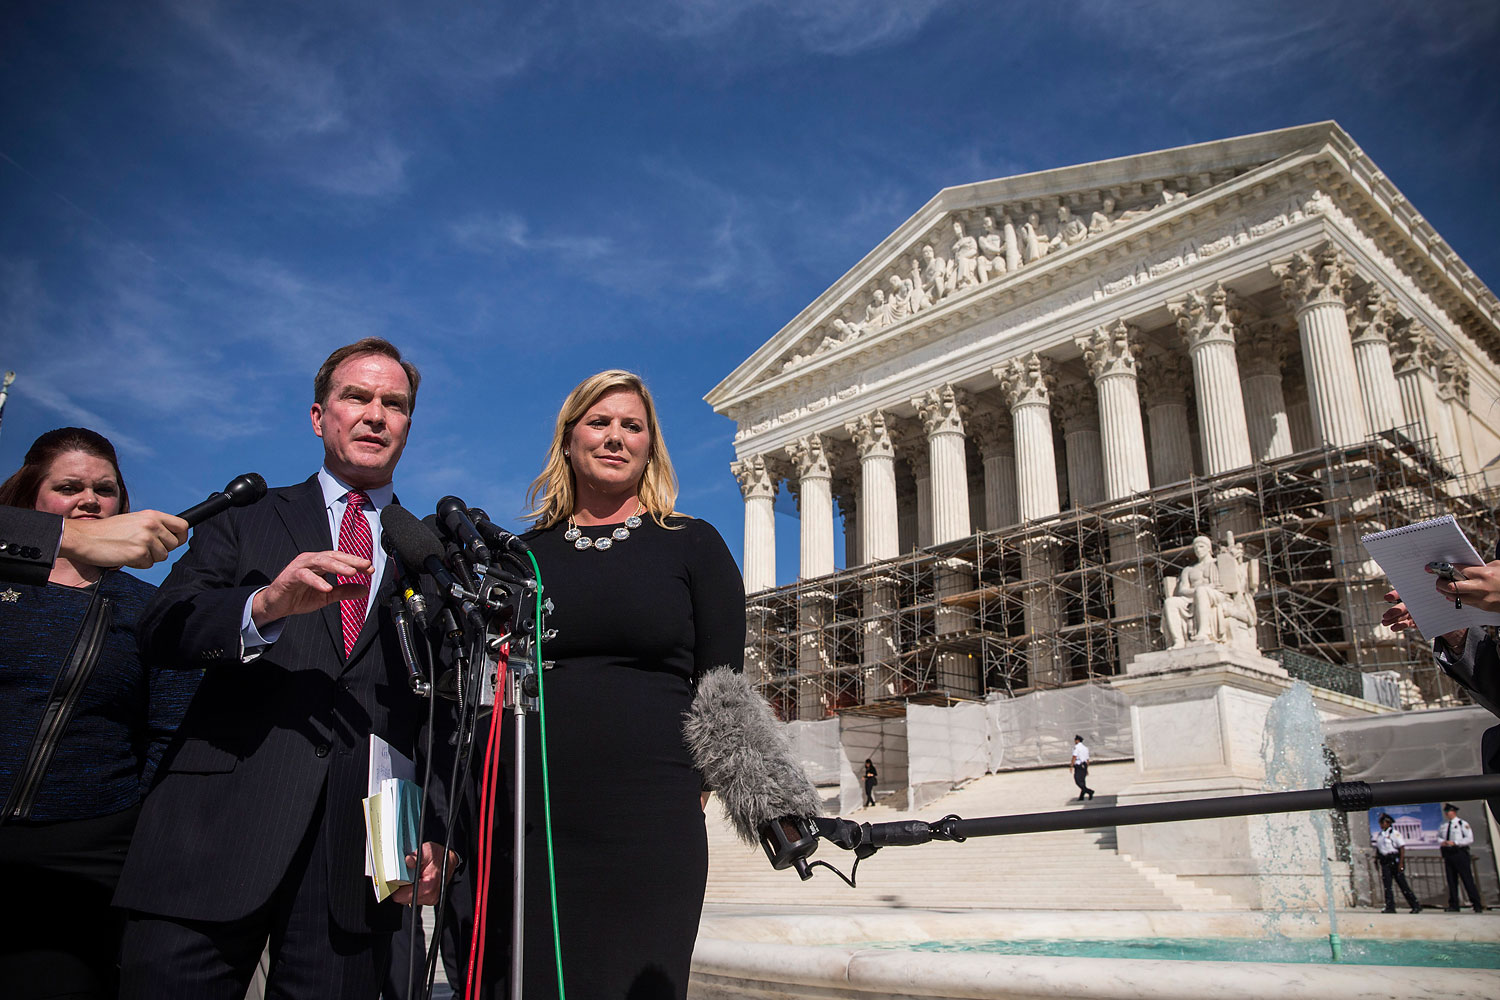 Jennifer Gratz, right, CEO of XIV Foundation and Michigan Attorney General Bill Schuette speak during a press conference outside the Supreme Court after going before the Supreme Court in "Schuette v. Coalition to Defend Affirmative Action" on Oct. 15, 2013 in Washington, DC.